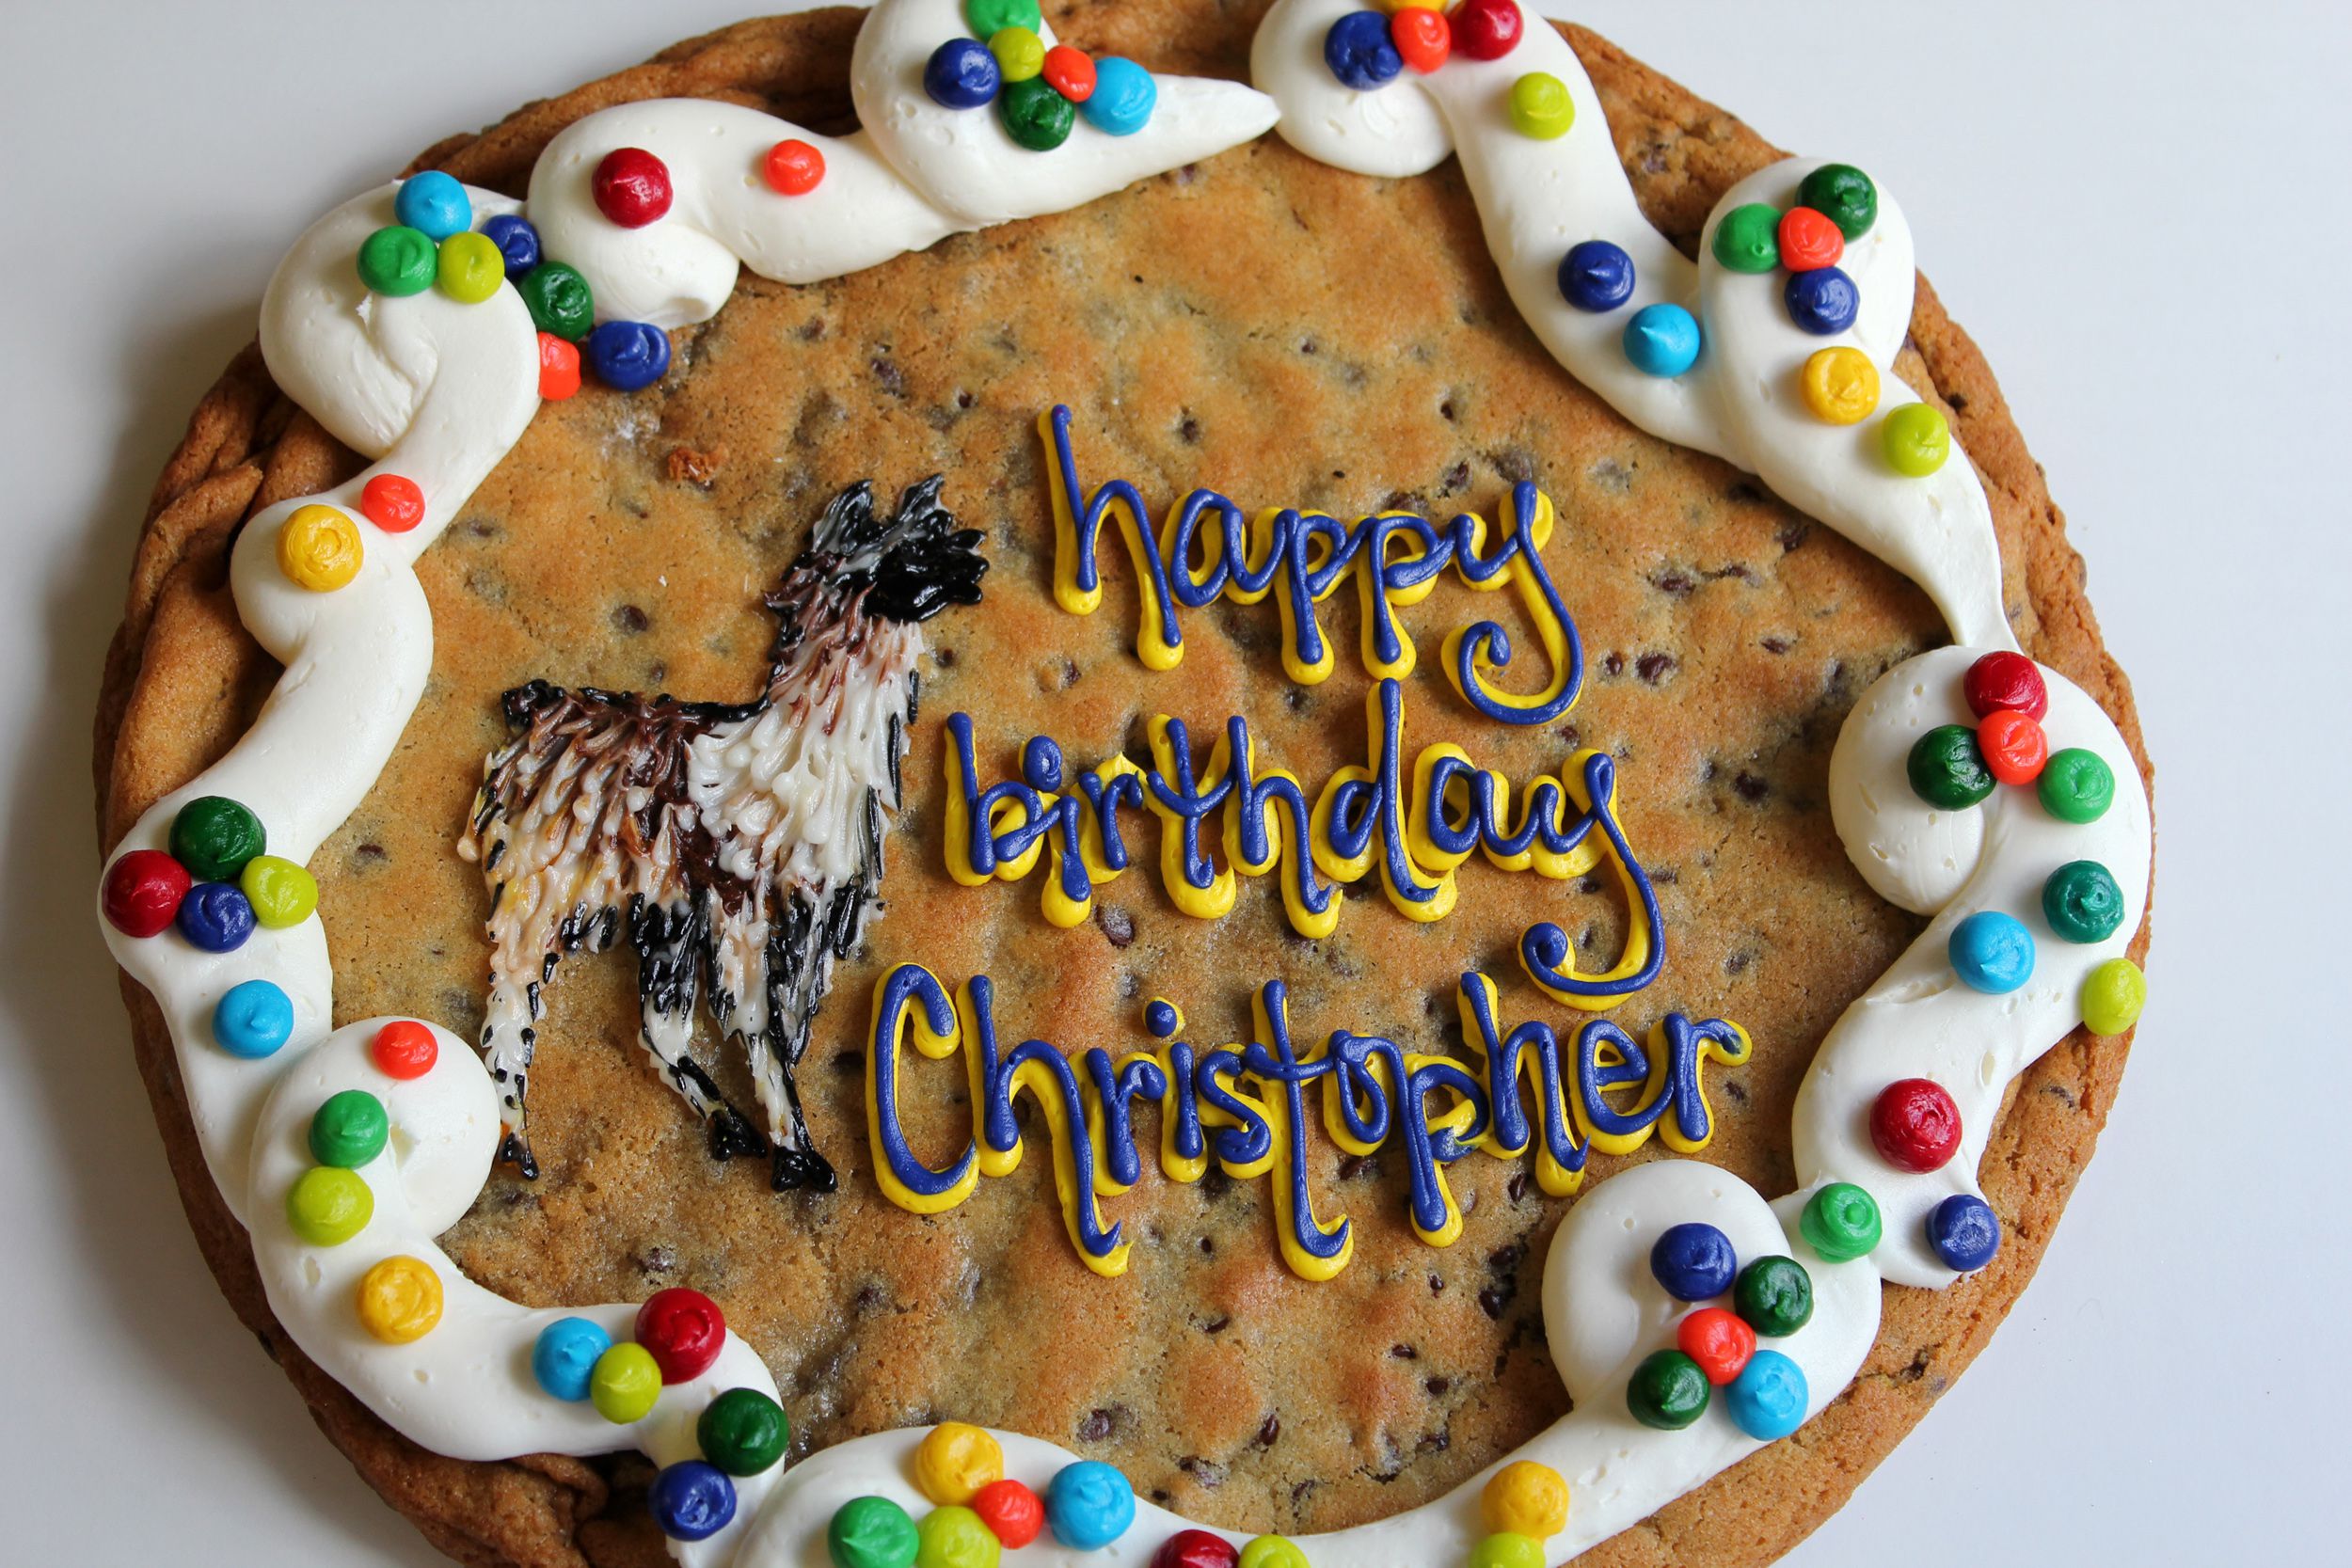 <p>Cookie cakes — really just giant, communal cookies — are fun for celebrations and make a big impression using the same inexpensive ingredients and without being much more complicated than a batch of traditional cookies. A specialized pan is required to pull off a cookie shape, though.</p>  <p><b>Recipe:</b> <a href="https://www.popsugar.com/food/Chocolate-Chip-Cookie-Cake-Recipe-30969850">PopSugar</a></p>  <p><a href="https://blog.cheapism.com/simple-delicious-chocolate-cake-recipes/">17 Scrumptious Cake Recipes for Chocoholics</a></p>